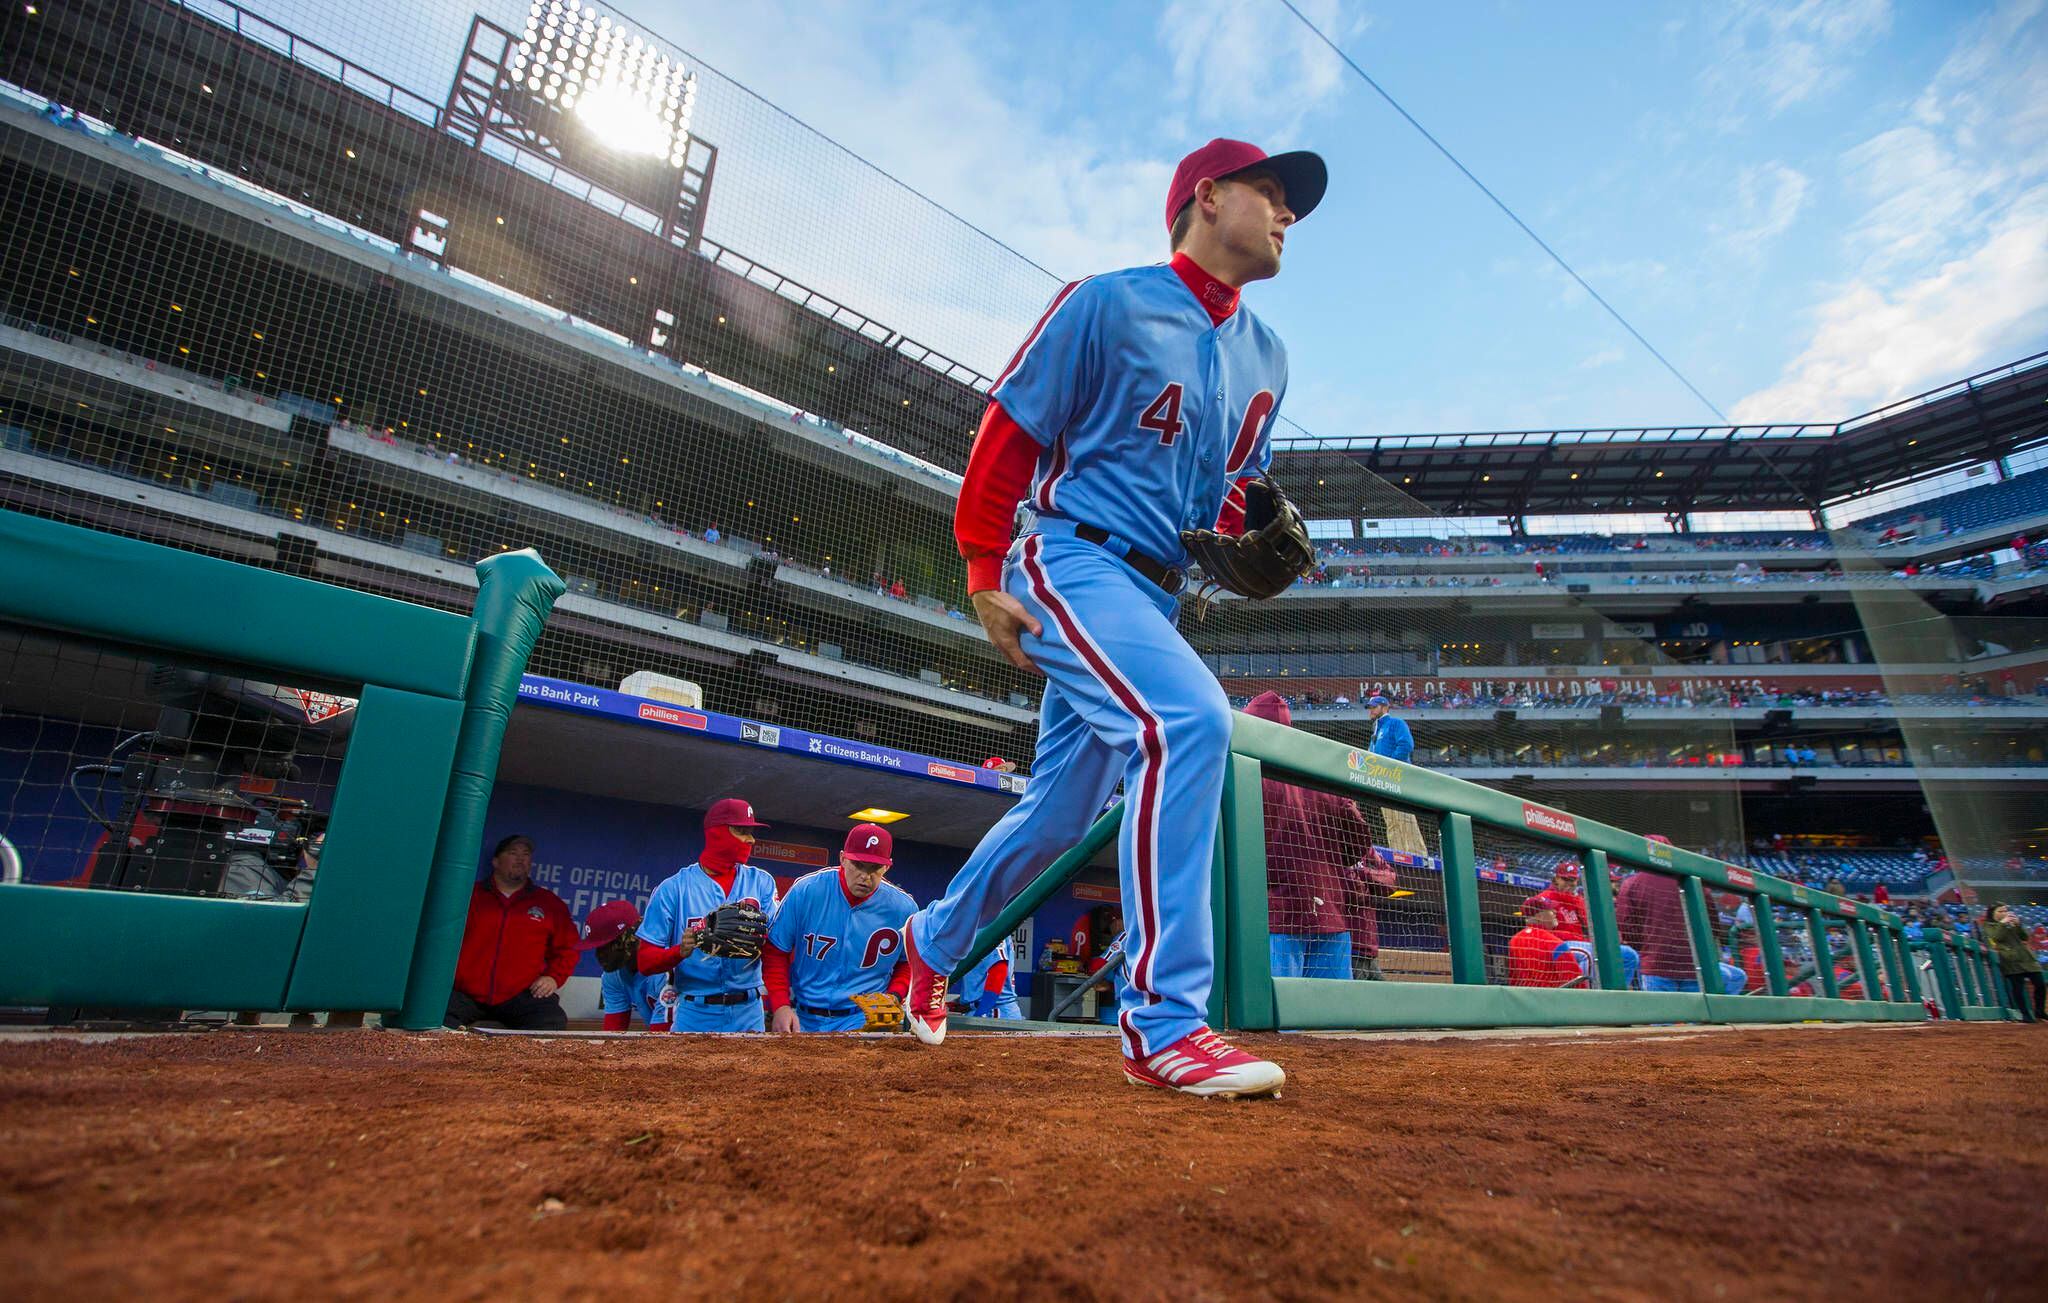 Phillies send Kingery to Triple-A to get back into the swing – Daily Local